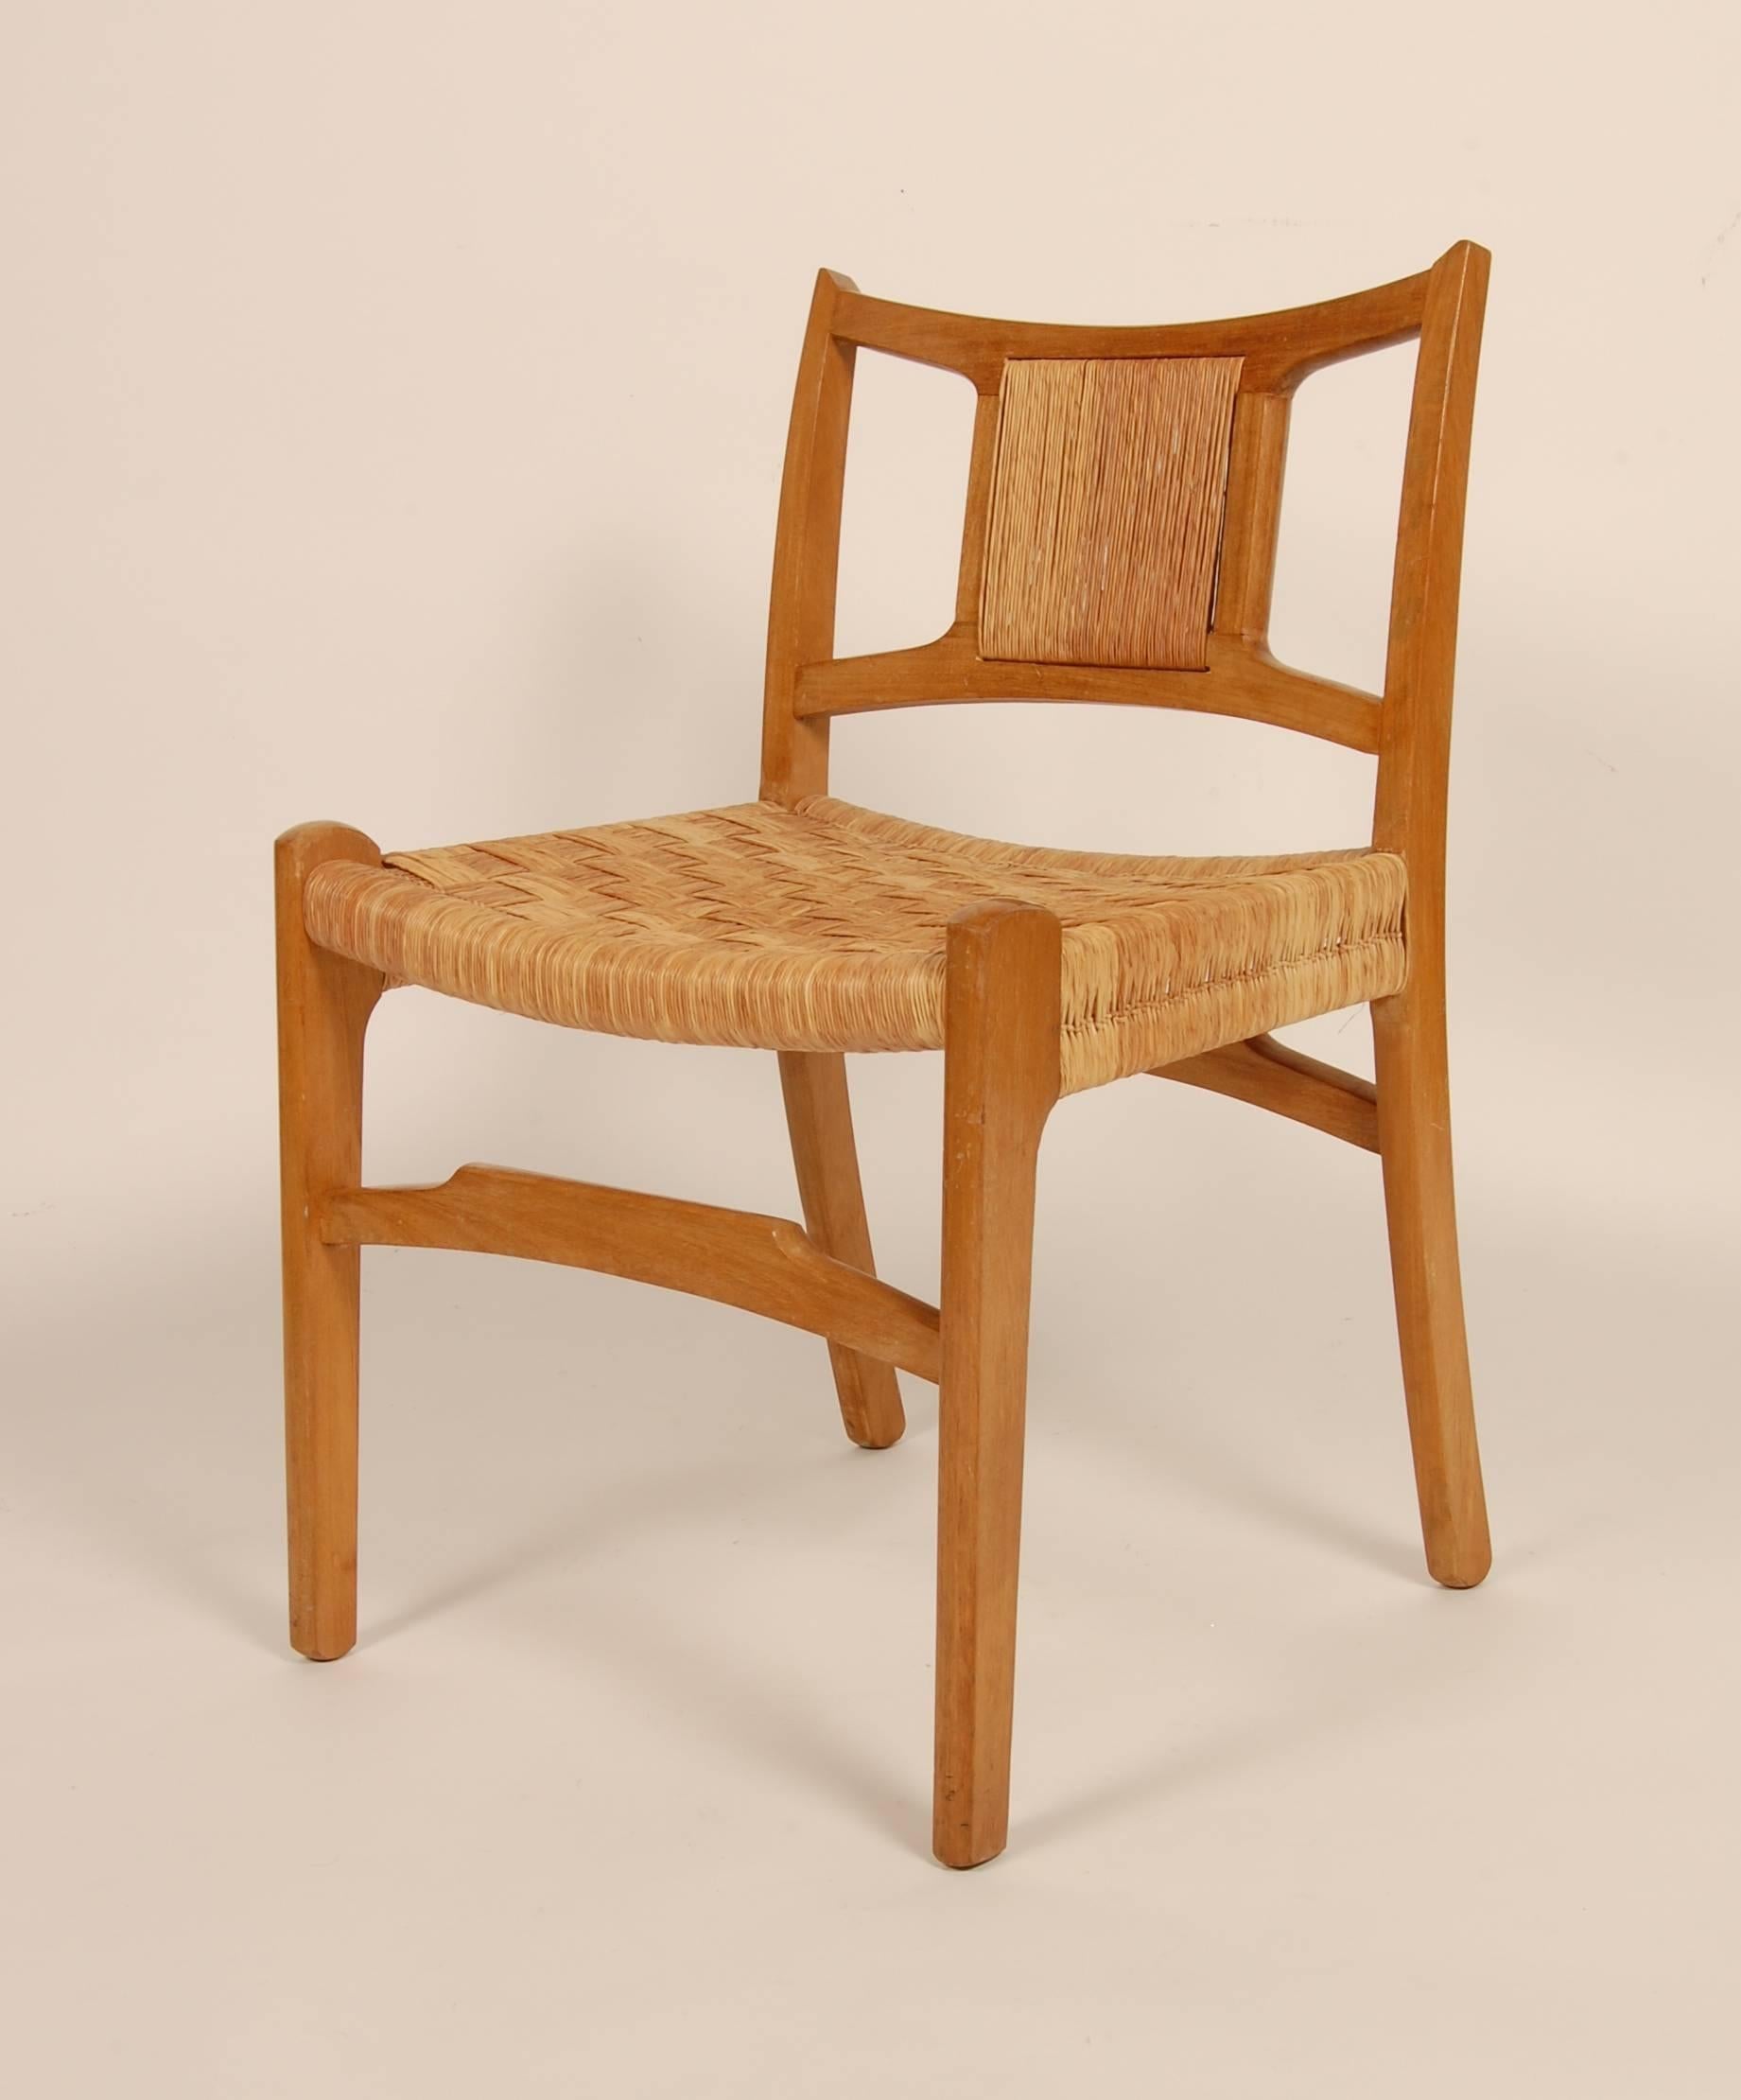 Wood Edmond Spence Side Chair for Industria Mueblera of Mexico